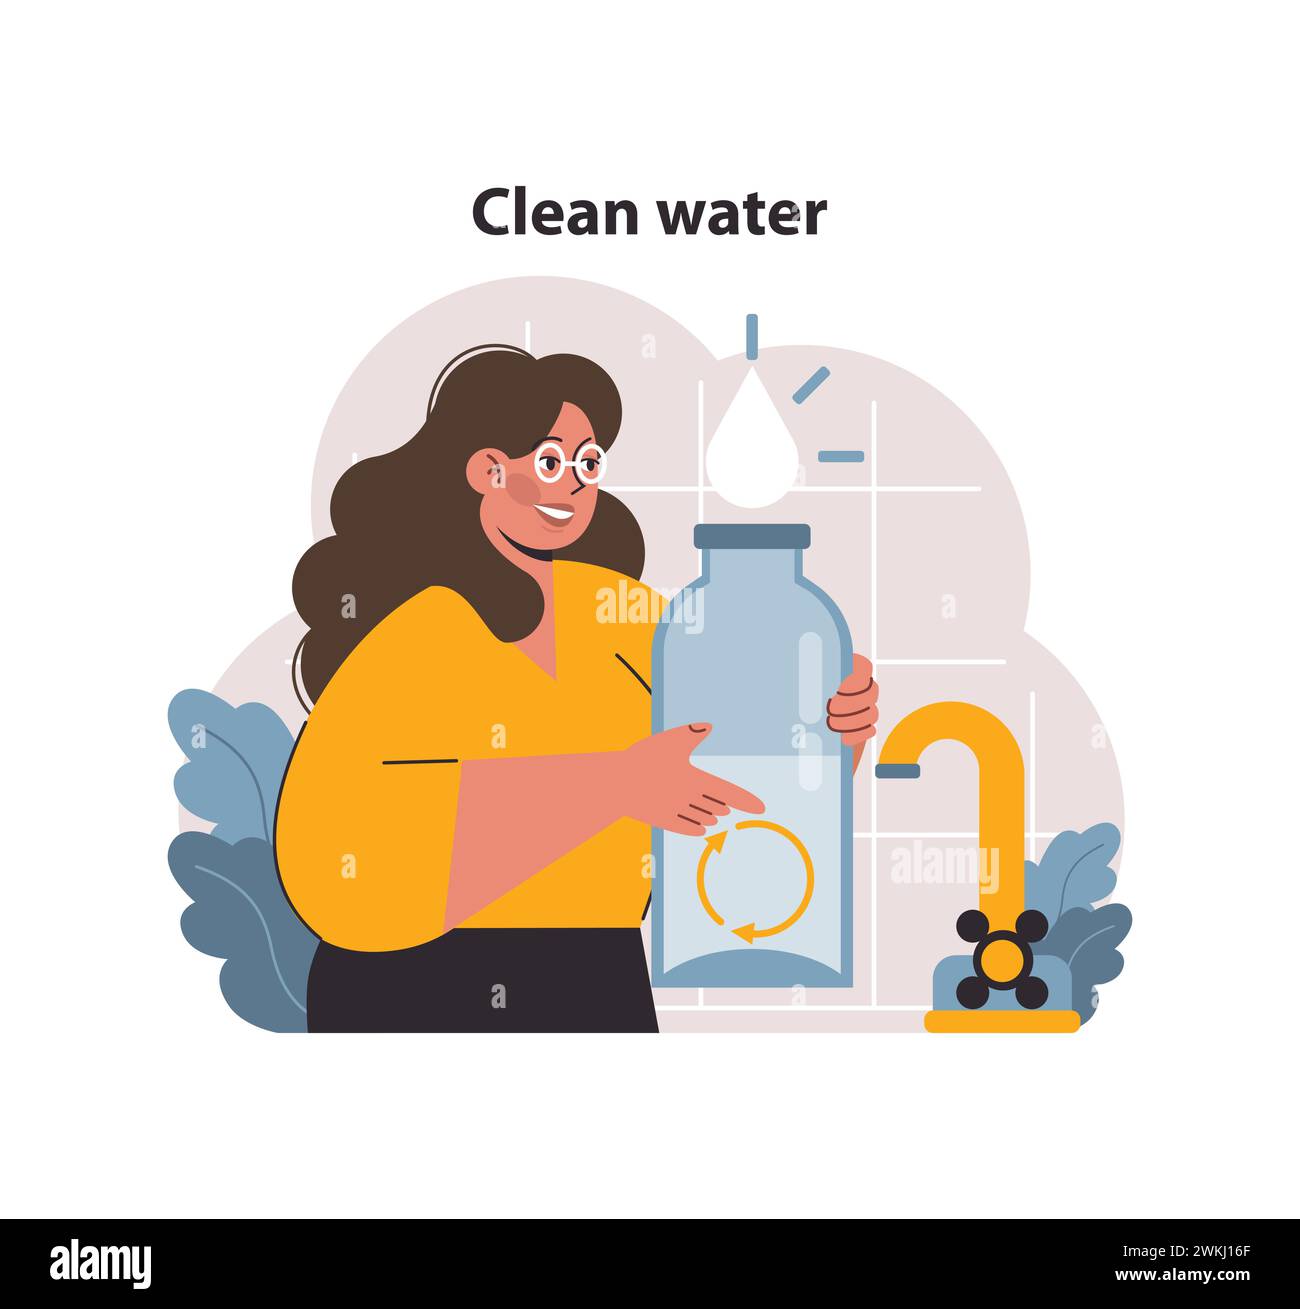 Clean water. Woman pouring clean water from faucet. SDG or sustainable development goal. Environment protection, climate and nature preservation. Flat vector illustration Stock Vector